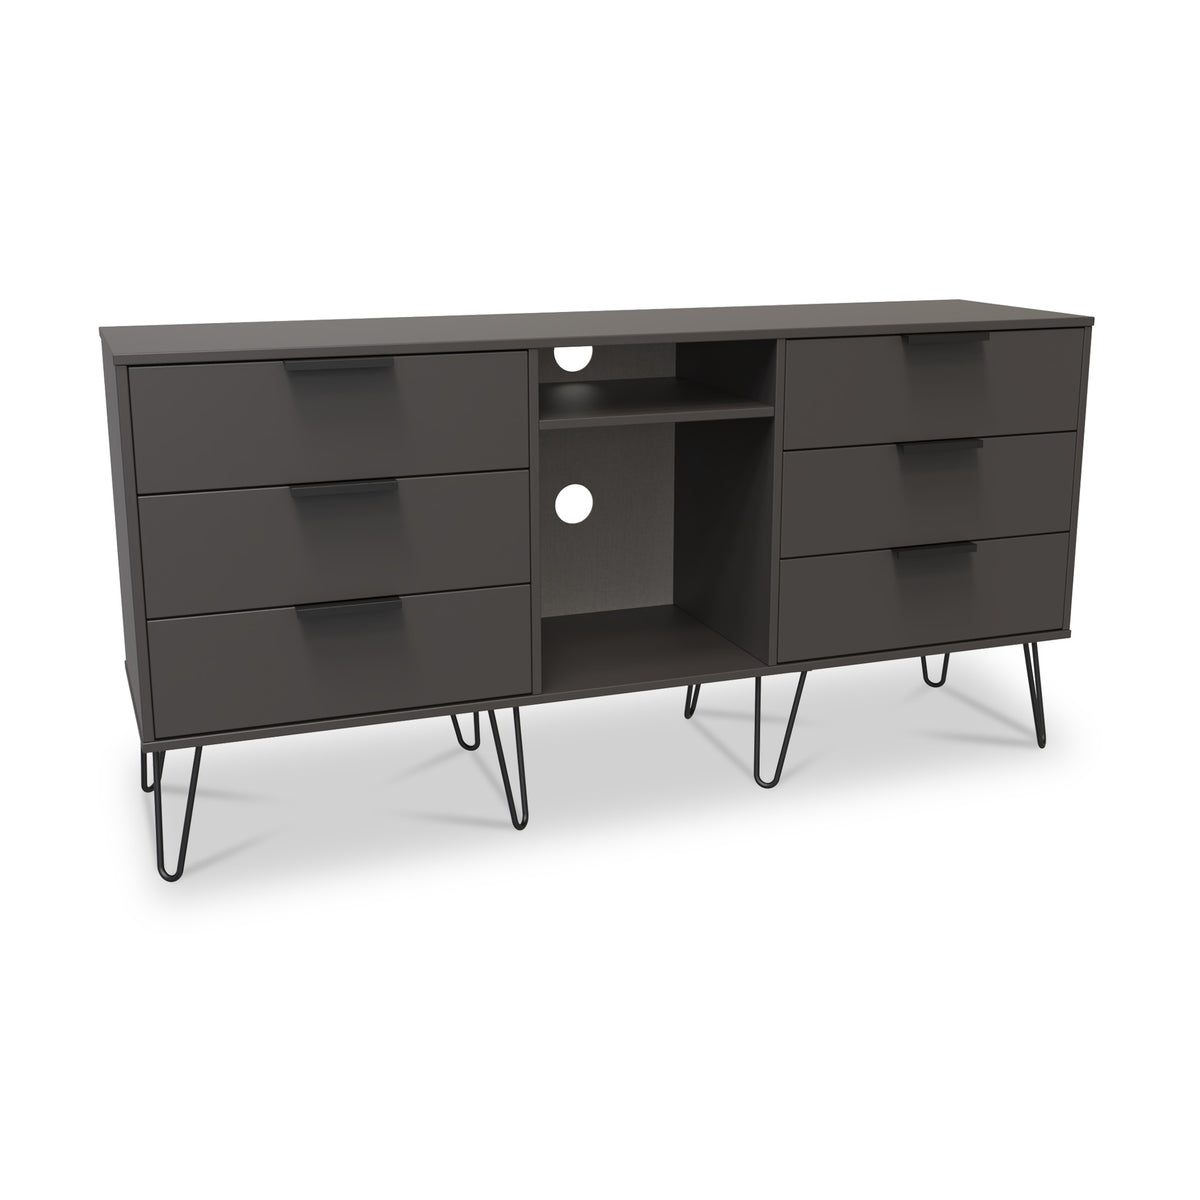 Moreno Graphite with Gold Hairpin Legs 6 Drawer Sideboard from Roseland Furniture